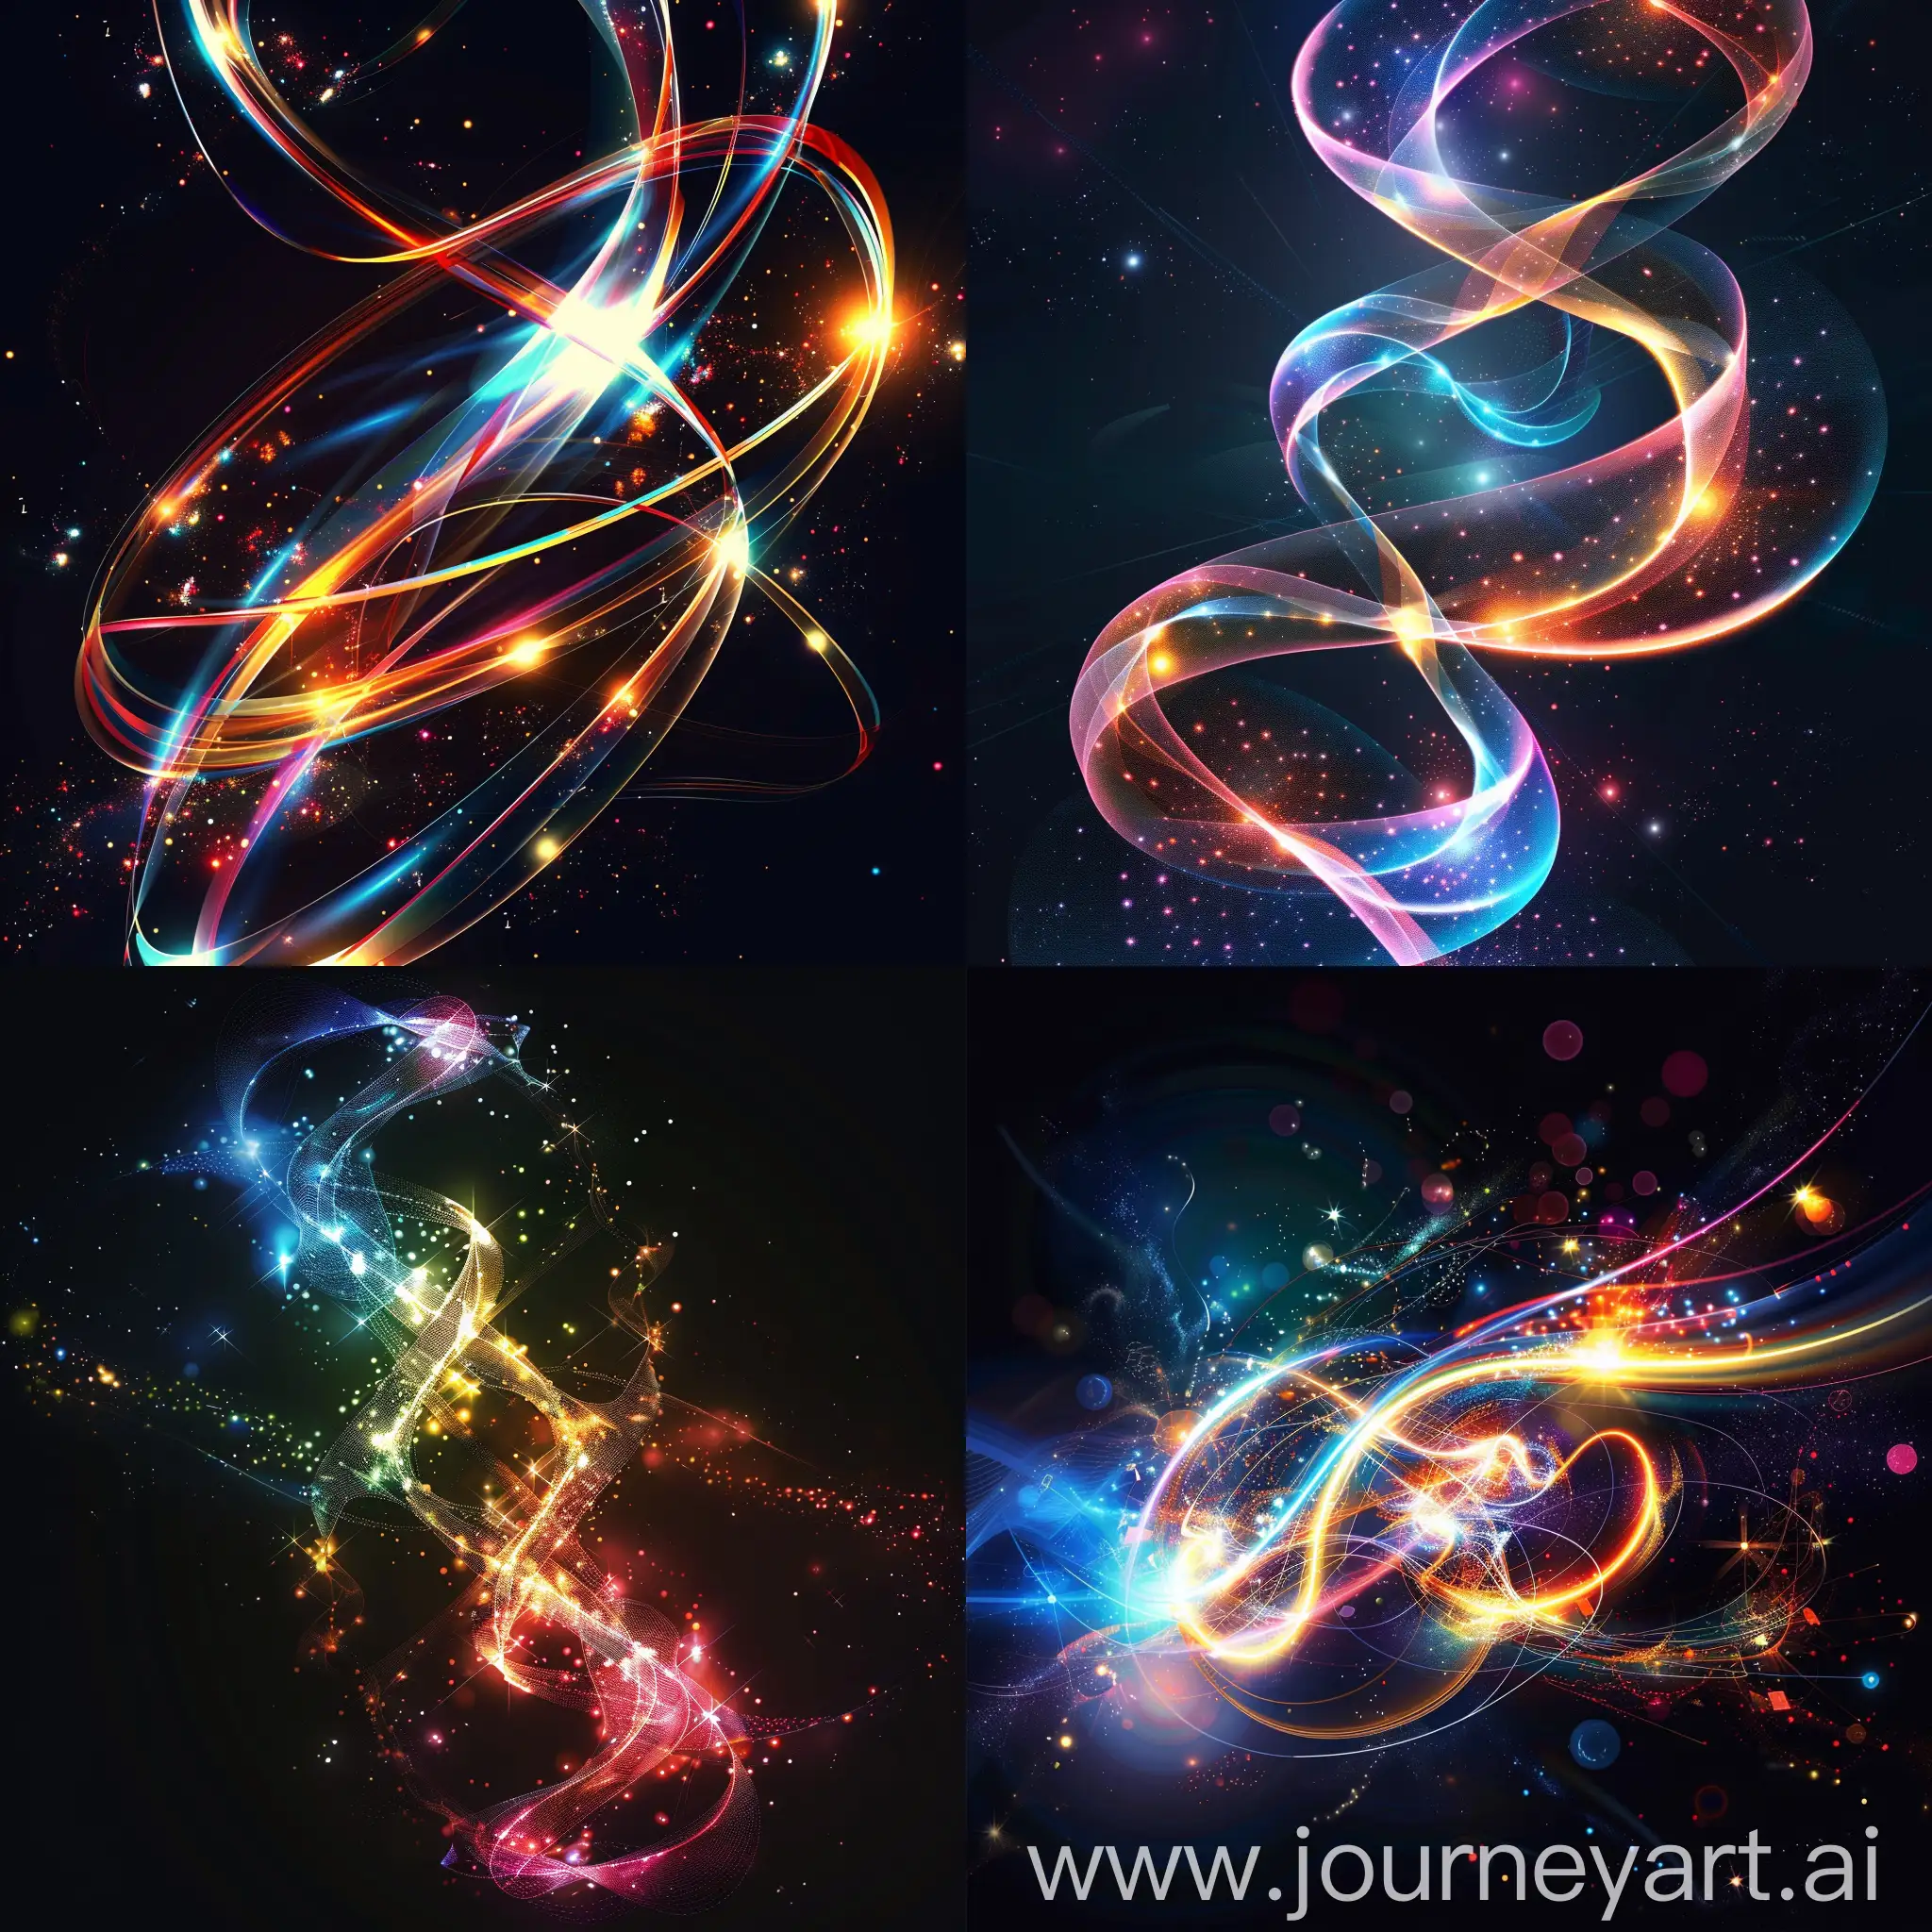 ultra design ribbons of brigjht like superstrings in quantum physics for a homepage for scientists with a deep dark background with colors of the universe

